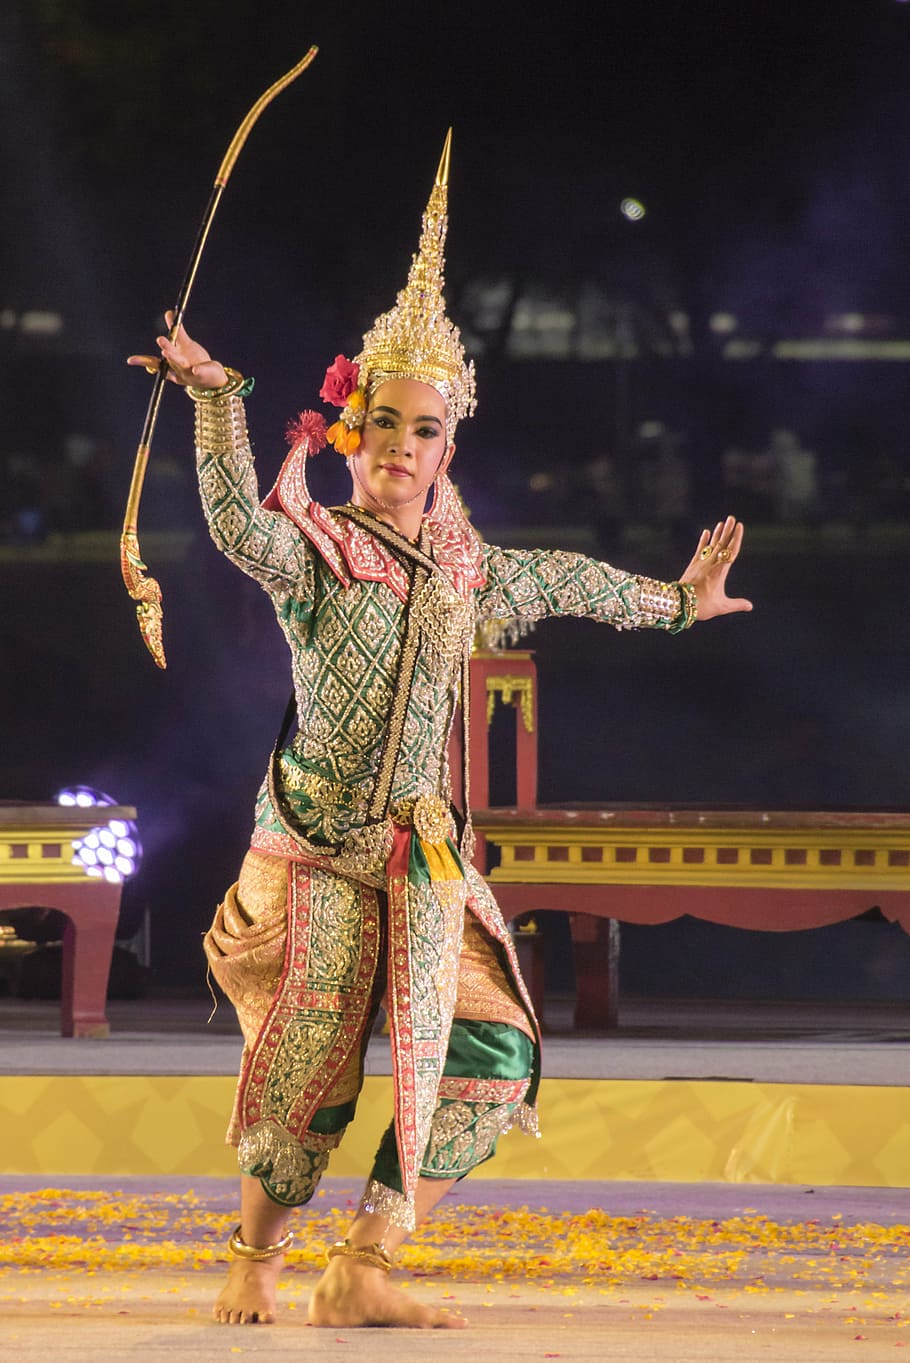 khon, performances of thailand, rama, performance, costume, real people, one person, full length, stage, dancing